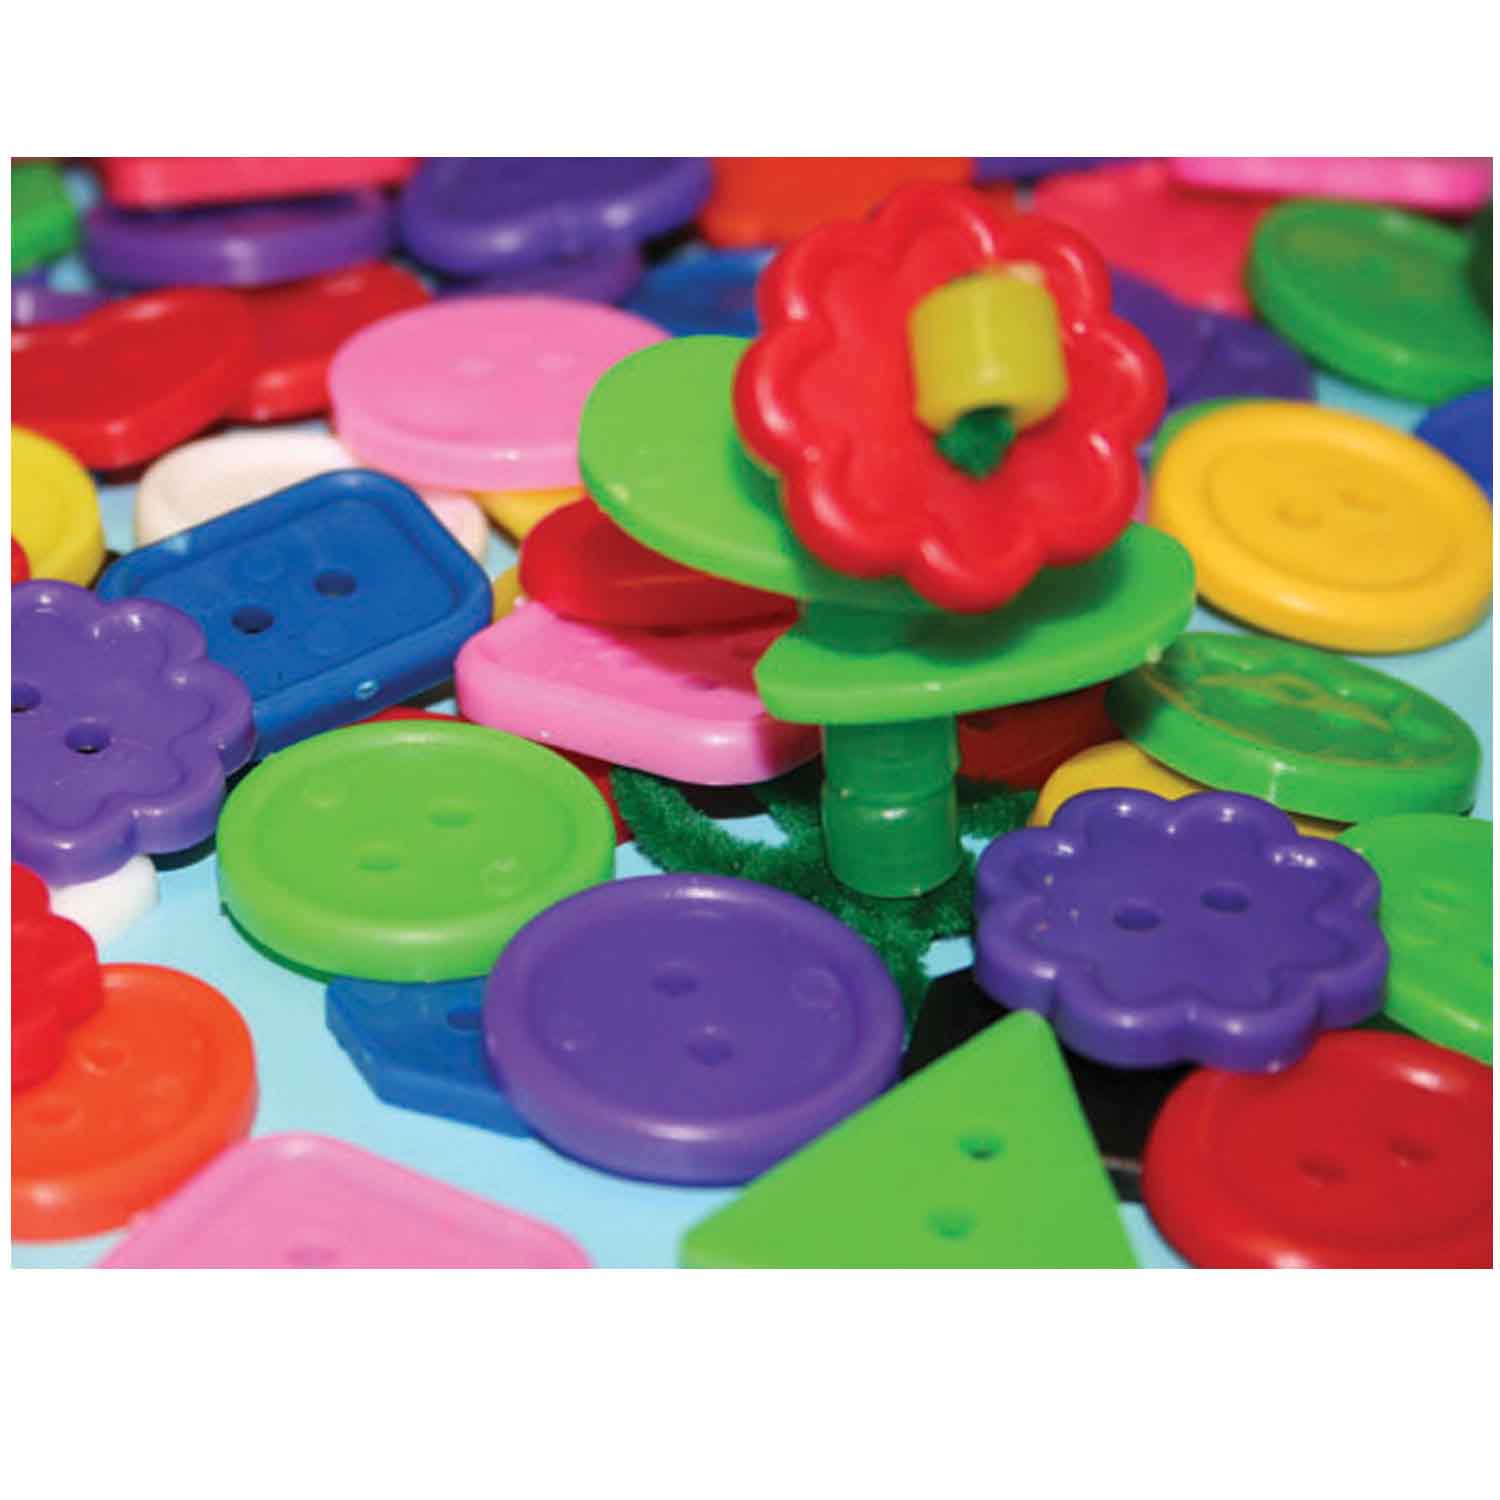 ROYLCO Bright Buttons, Assorted Sizes, Shapes and Color, 1/2-Pound